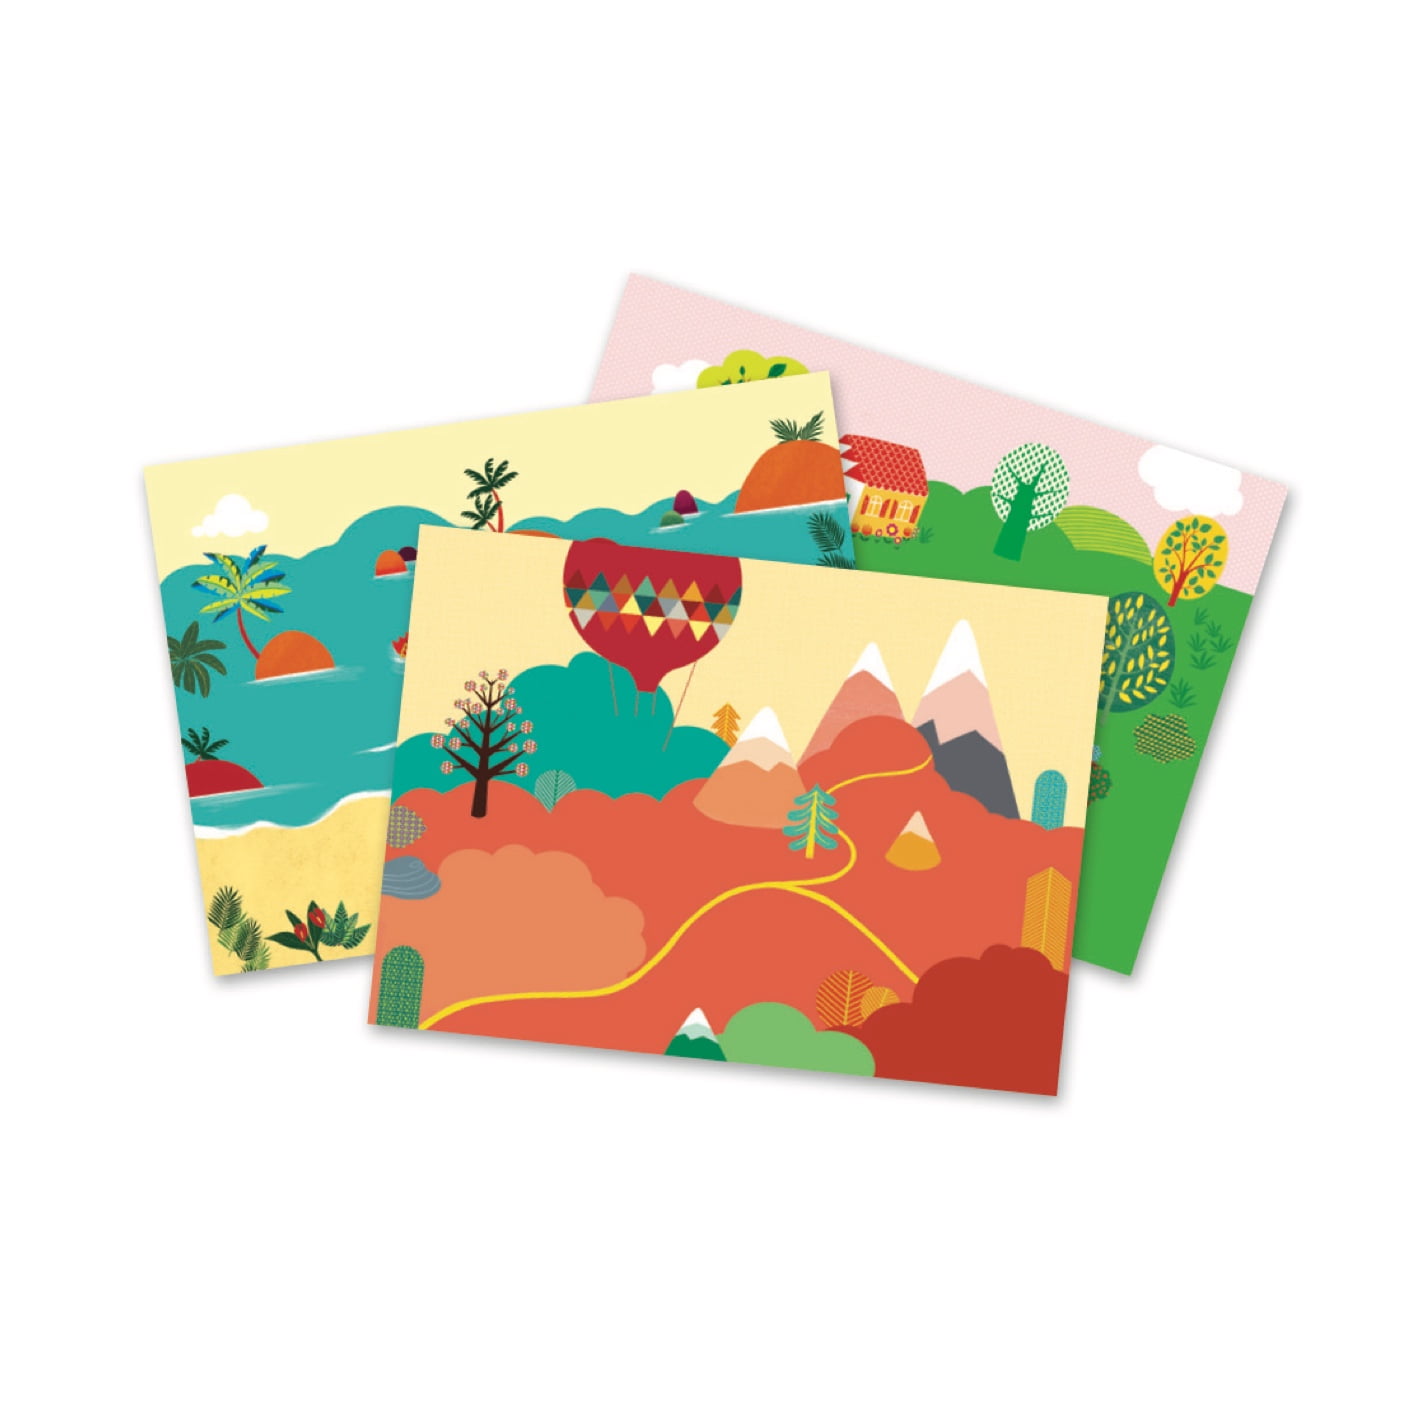 Transfer stickers - Sea, mountains and farm